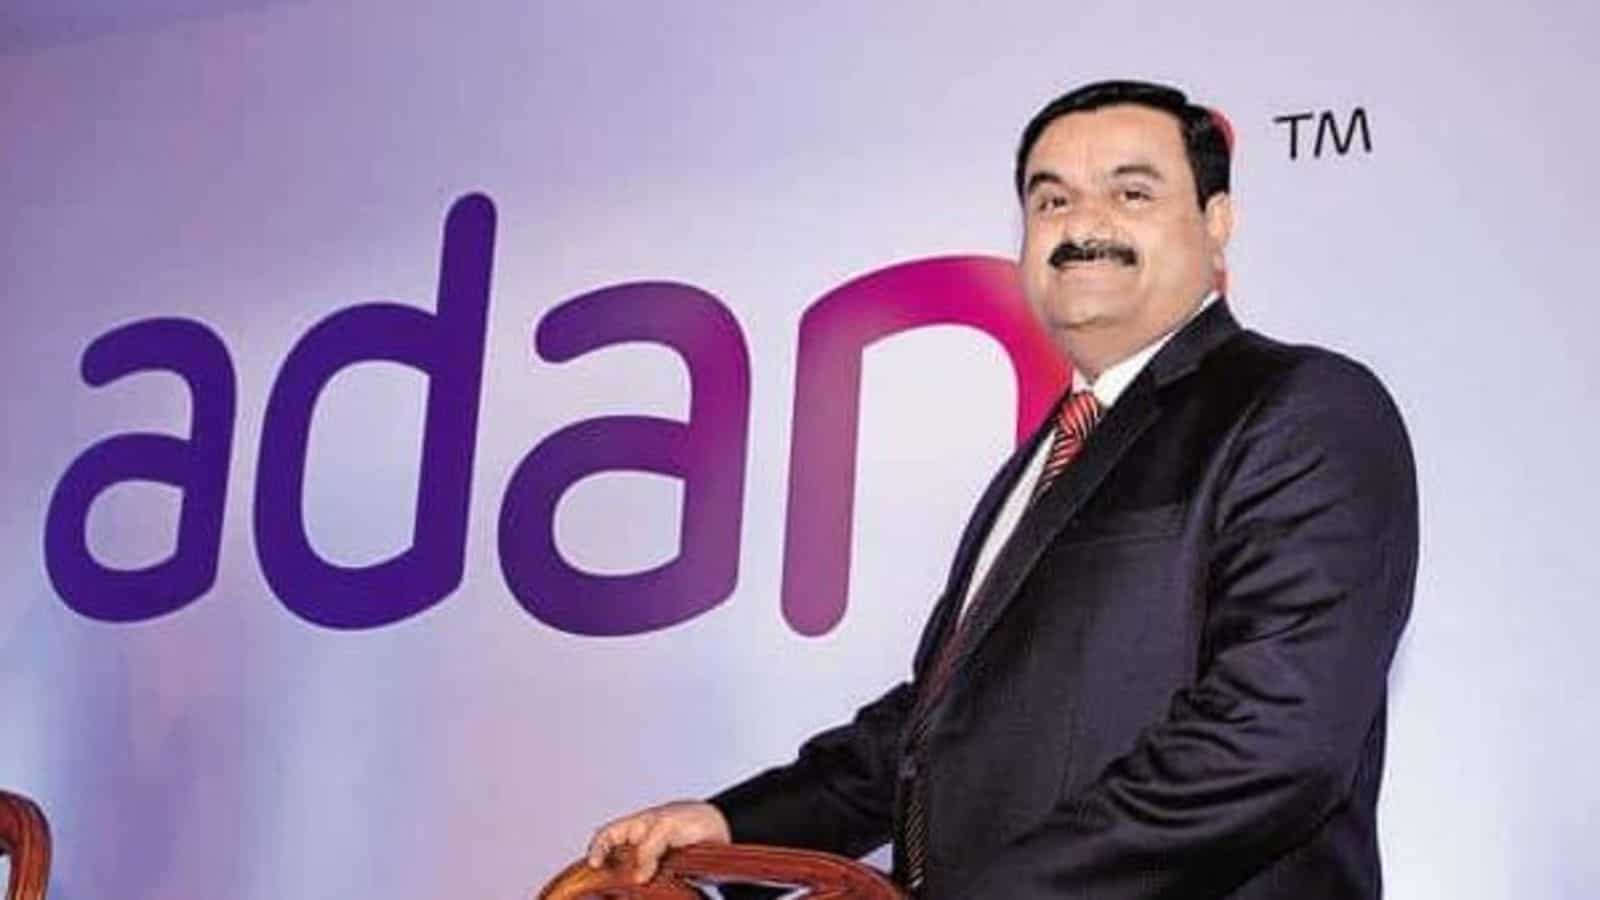 A $43 billion jump in Gautam Adani's fortune is fraught with many risks